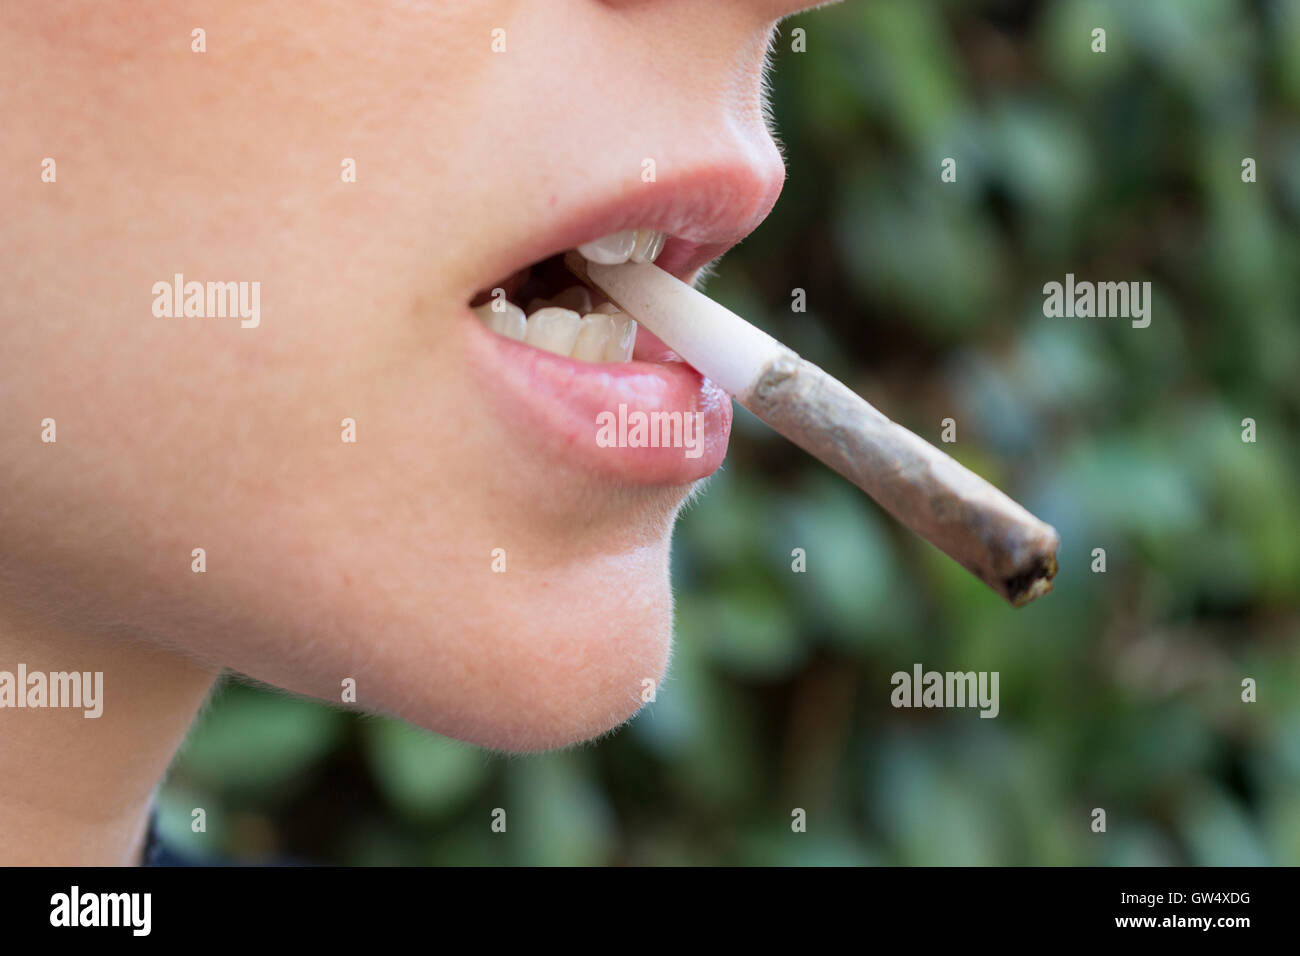 Woman With a Marijuana Joint in Her Mouth Stock Photo